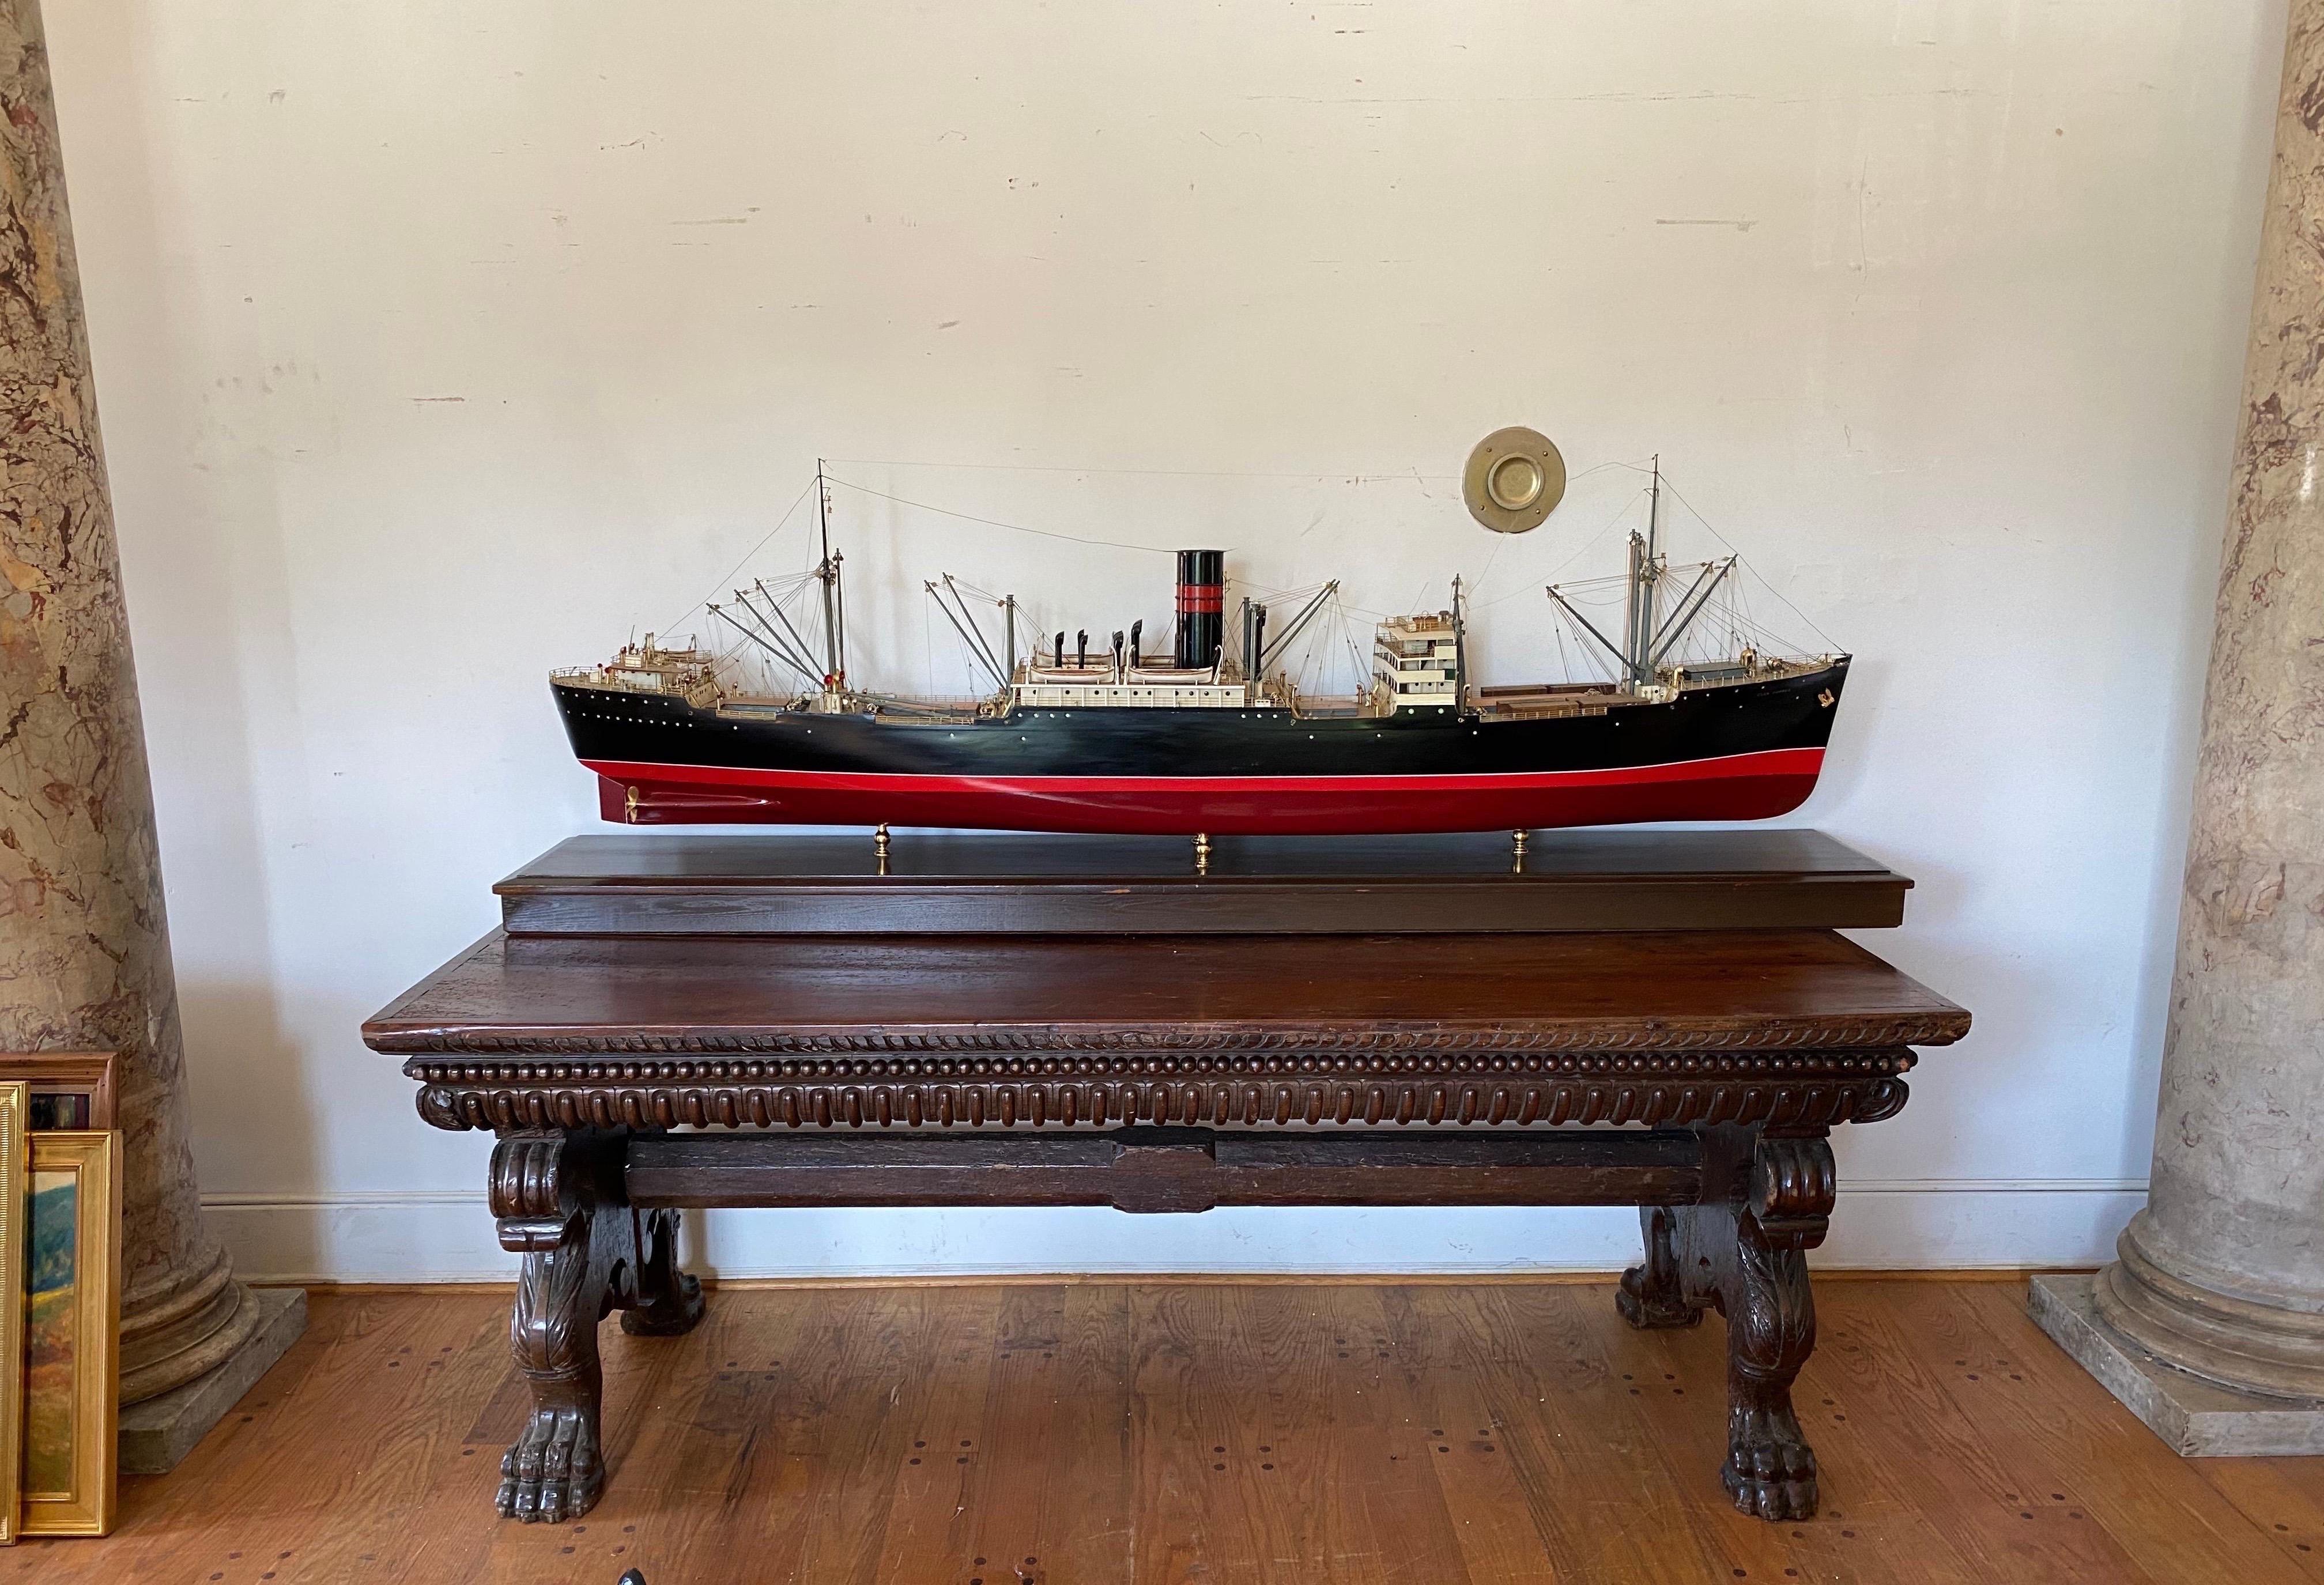 Remarkably detailed model of the Clan Forbes. Statement piece for any room!


Clan Forbes was built at the Greenock Dockyard Co., Greenock as one of the Cameron class of steam merchant ships for the Clan Line. She was launched on 8 September